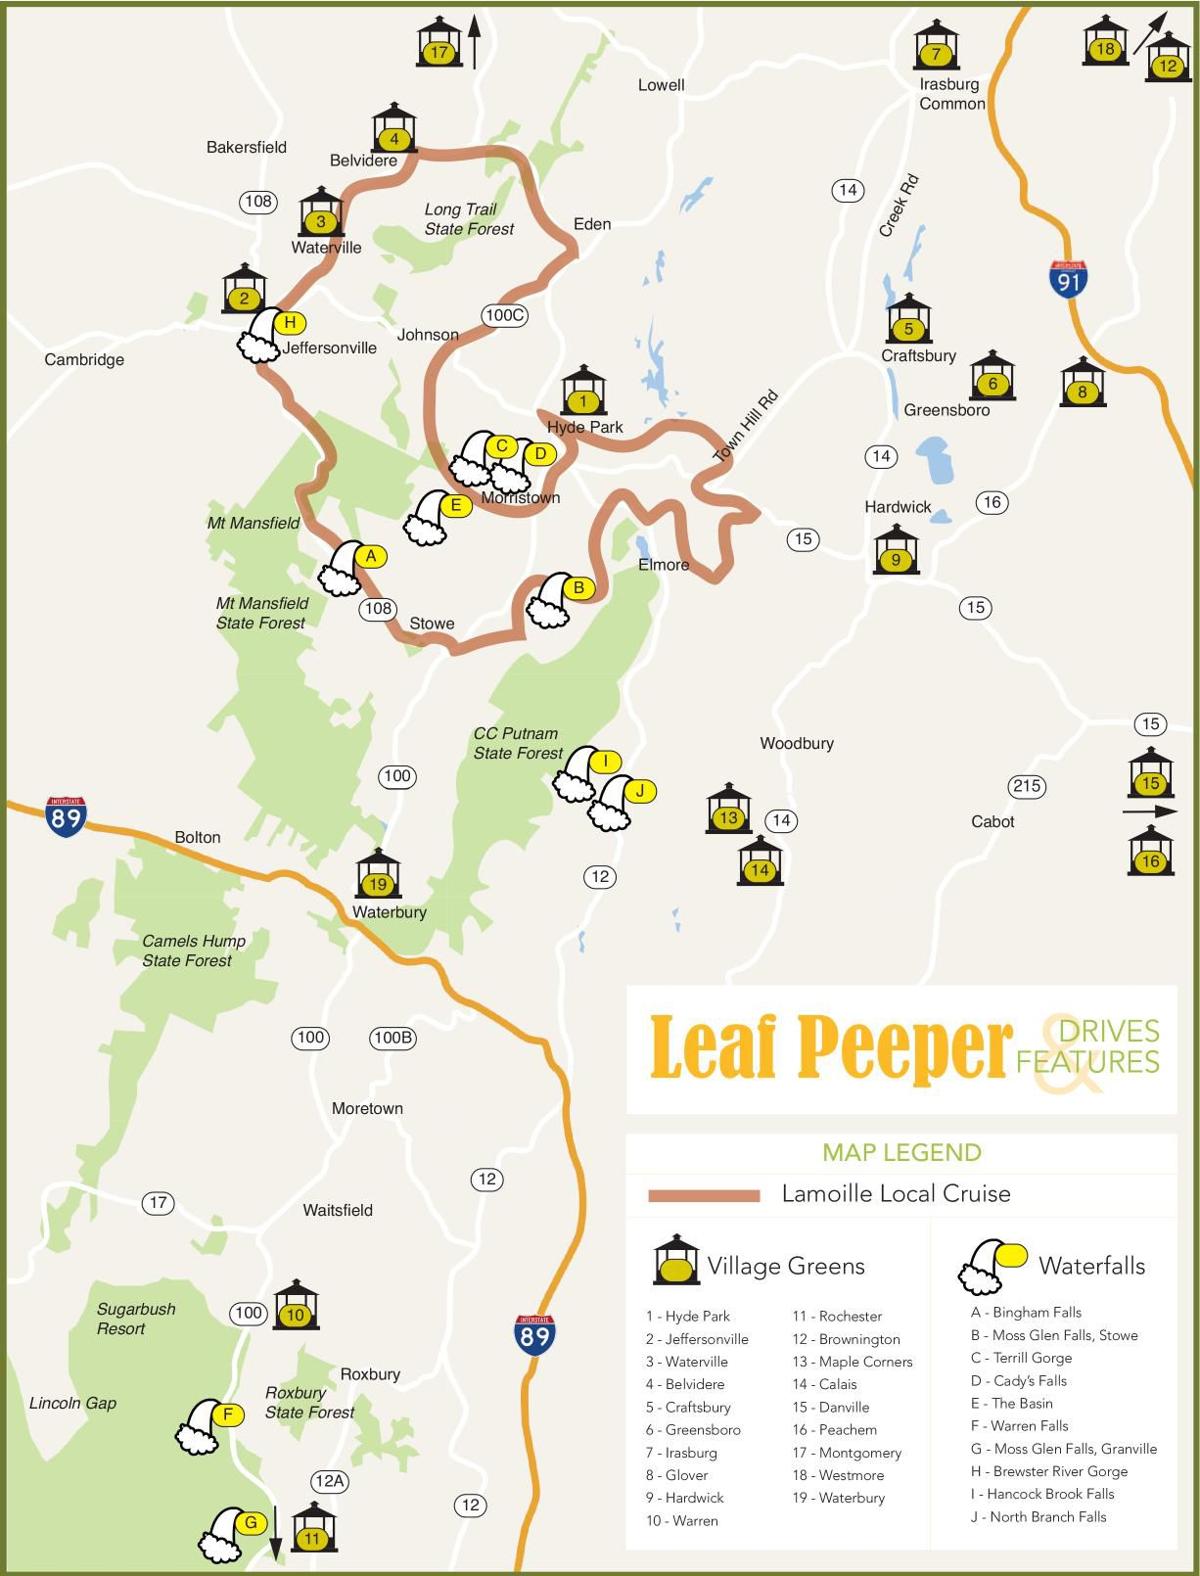 Leaf peeper drives and features